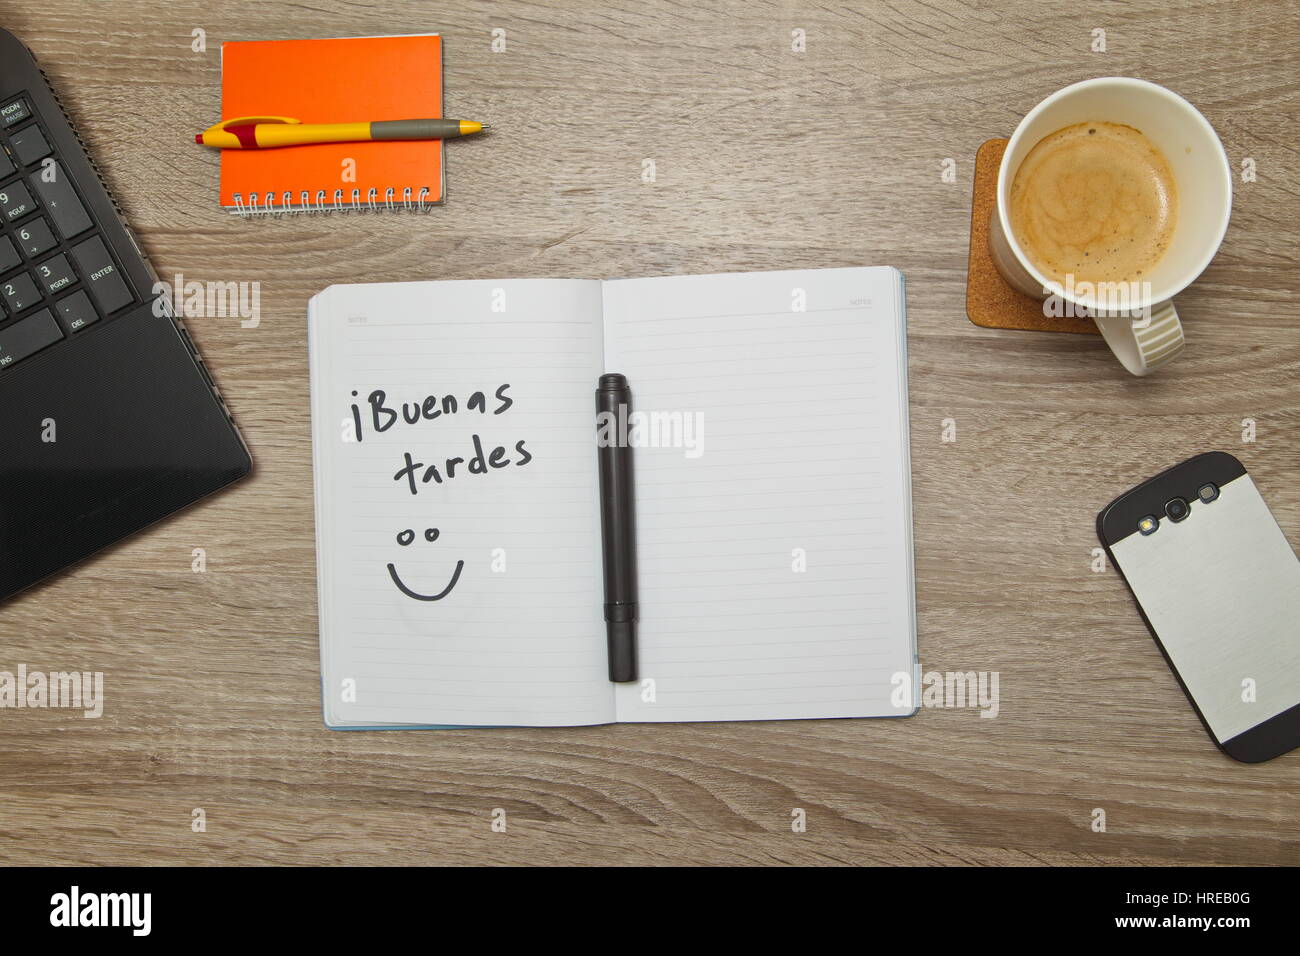 Open notebook with Spanish words 'Buenas Tardes' ( Good Afternoon) and a cup of coffee on wooden background. Stock Photo